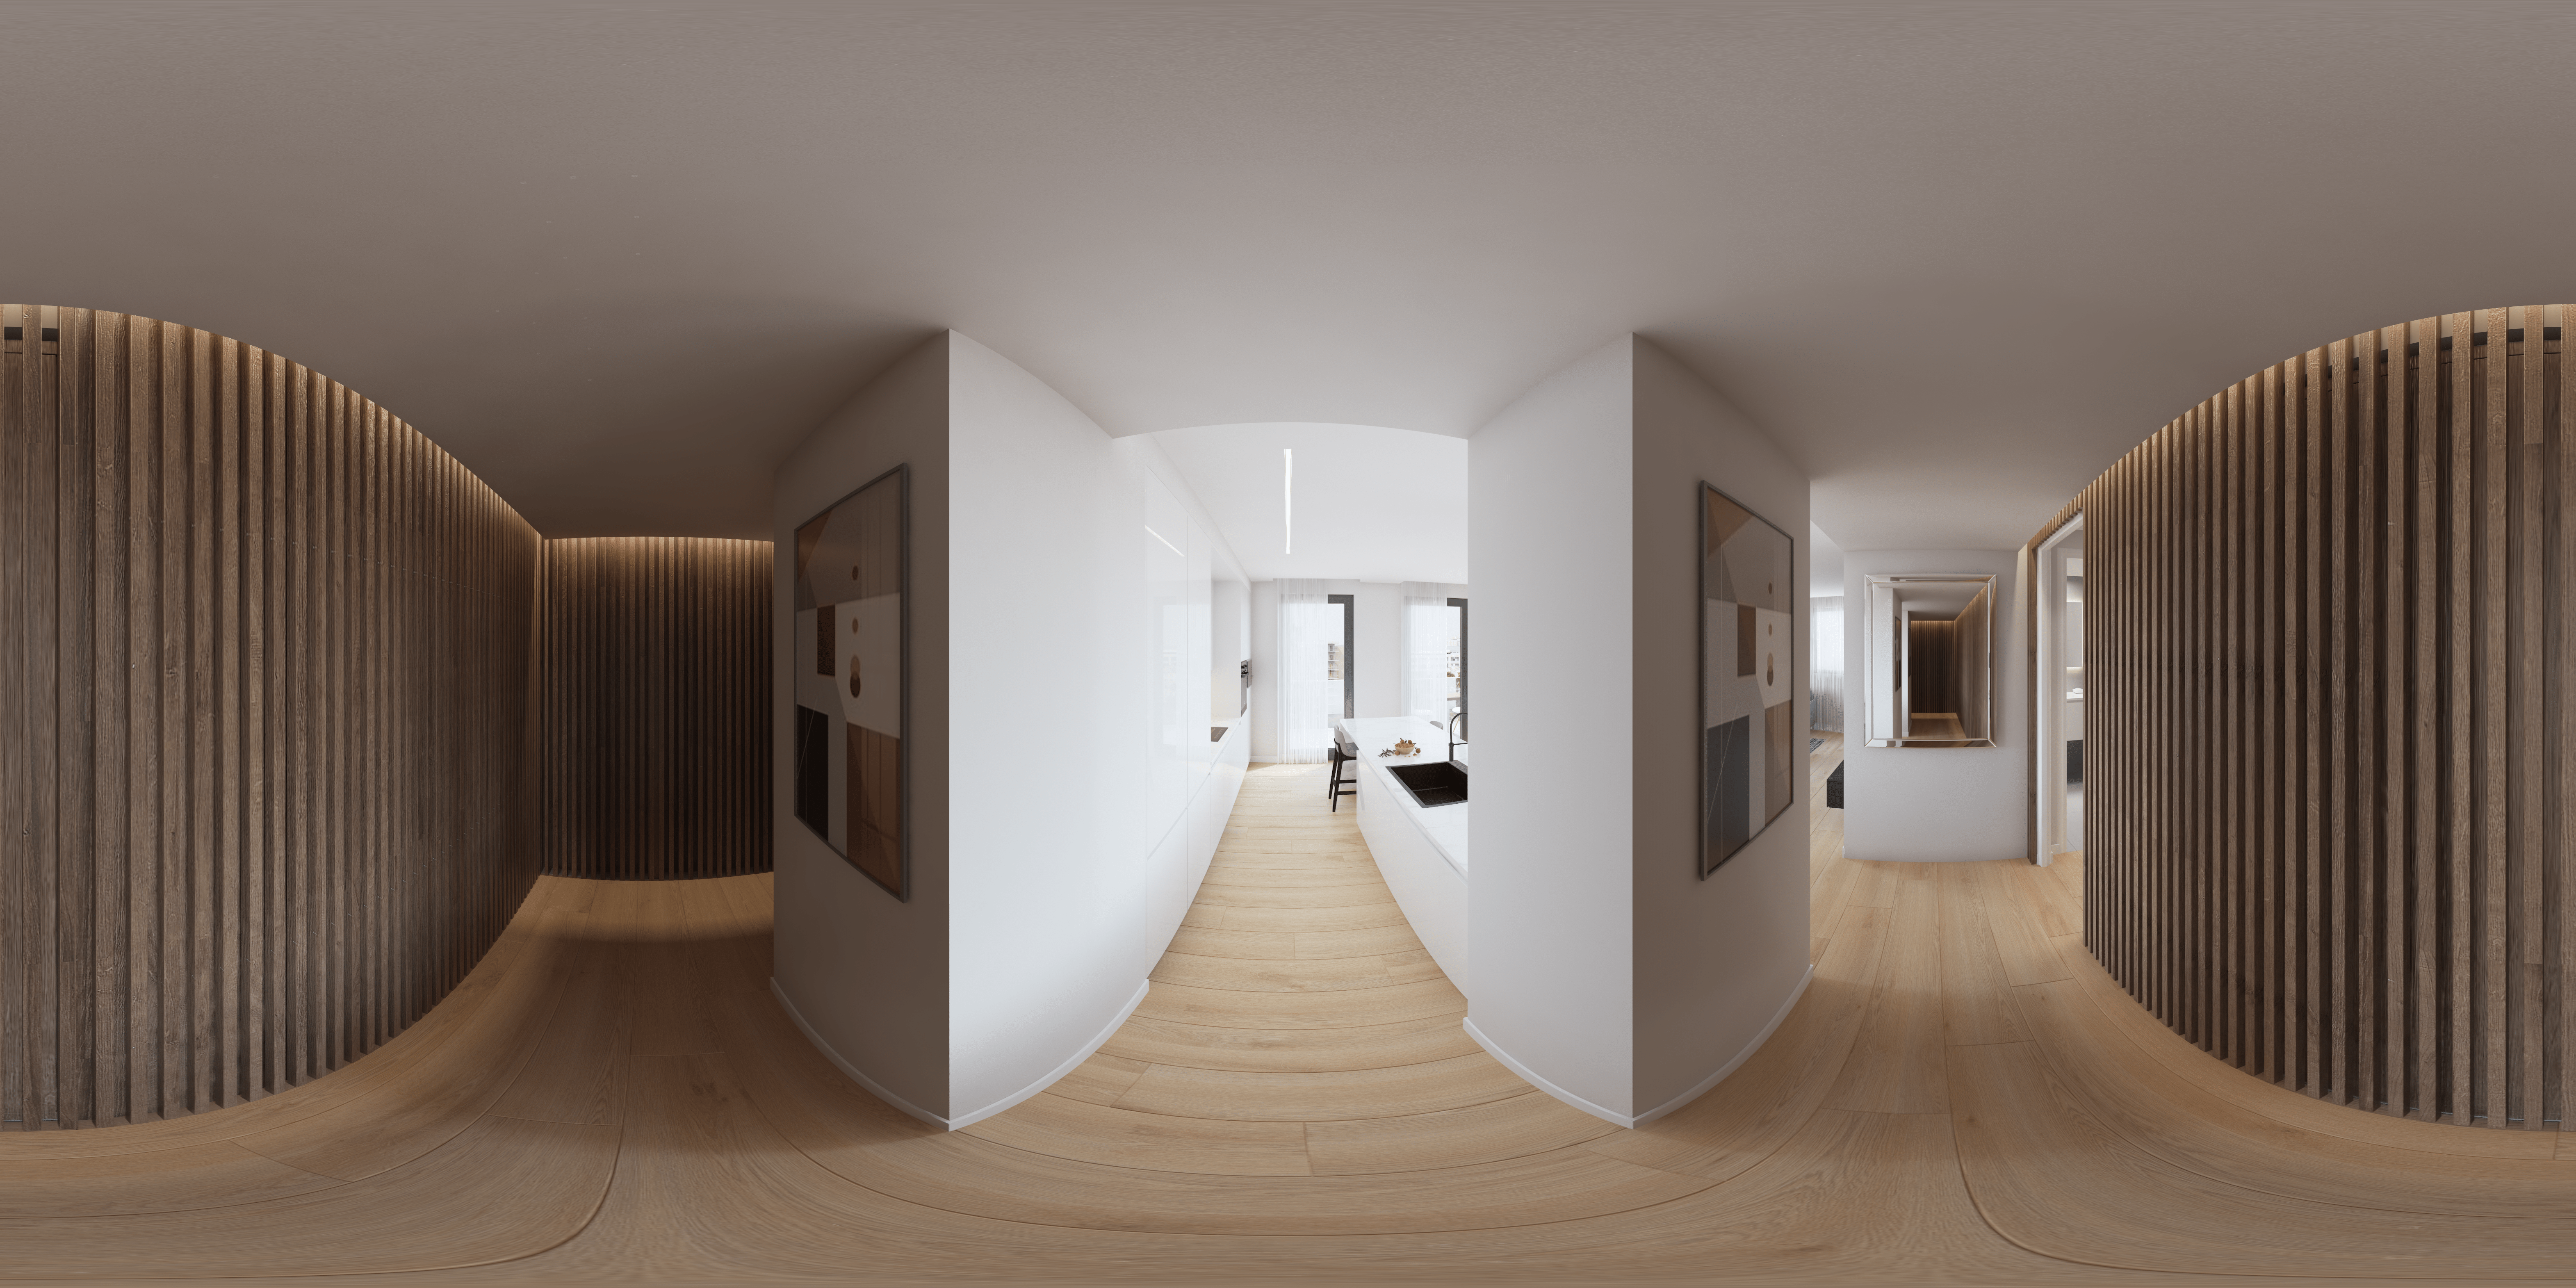 ultra fast render delivery of hallway with wooden striped walls, oak floors, white walls with art piece, using user friendly online rendering platform for interior designers